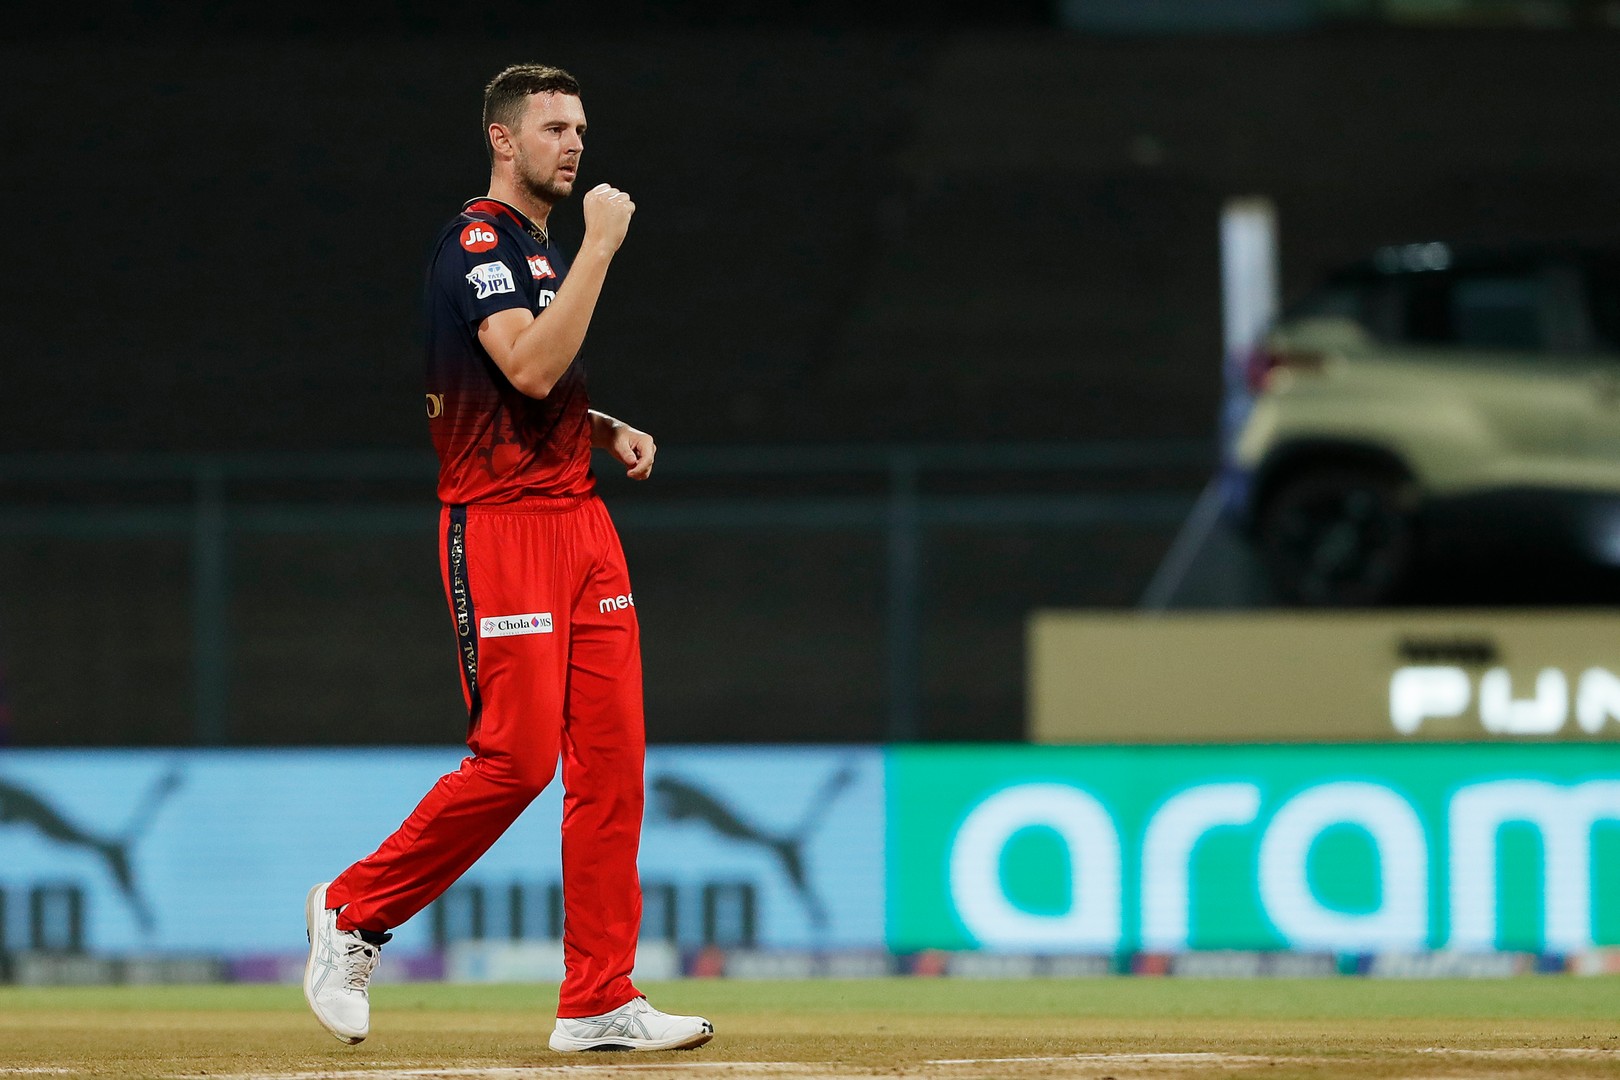 RCB VS GT, 19TH MAY, 2022, GAME 14 - 3